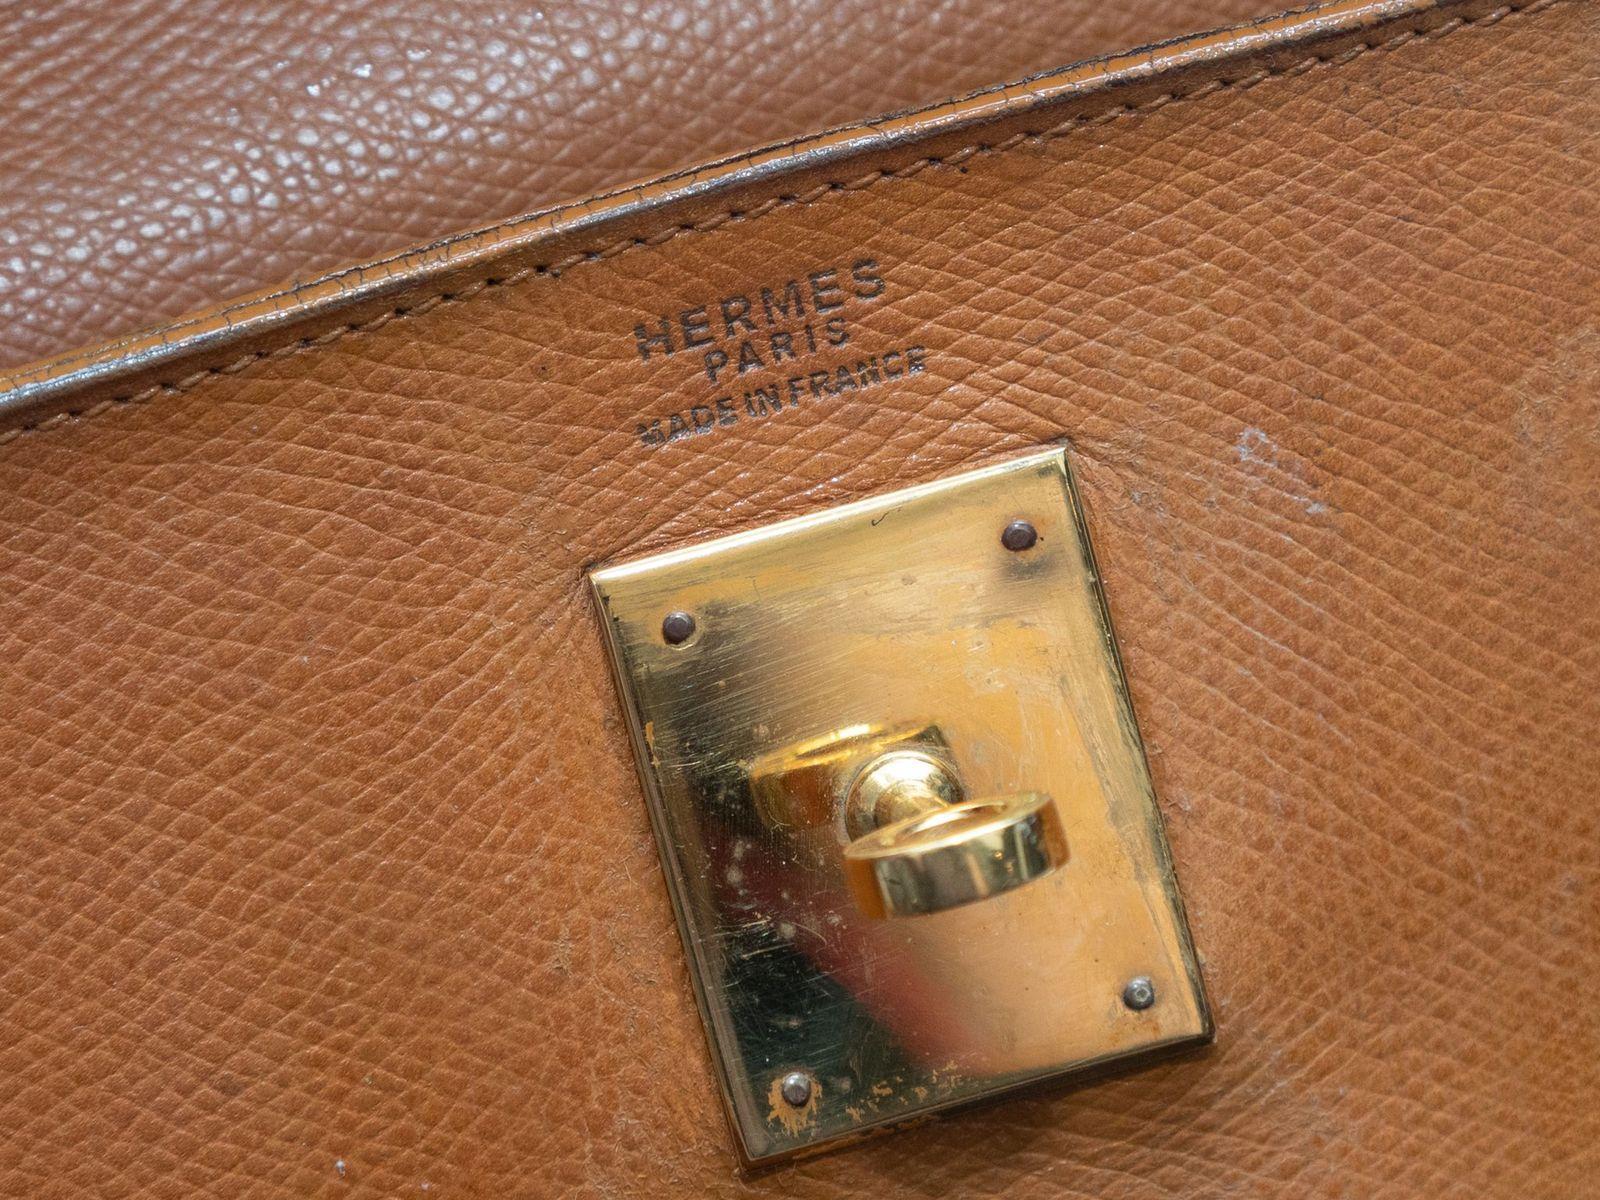 Product Details: Vintage Tan Hermes 1979 Kelly 32 Bag. The Kelly 32 bag features a leather body, gold-tone hardware, single rolled top handle, and front clasp closure. 11.5